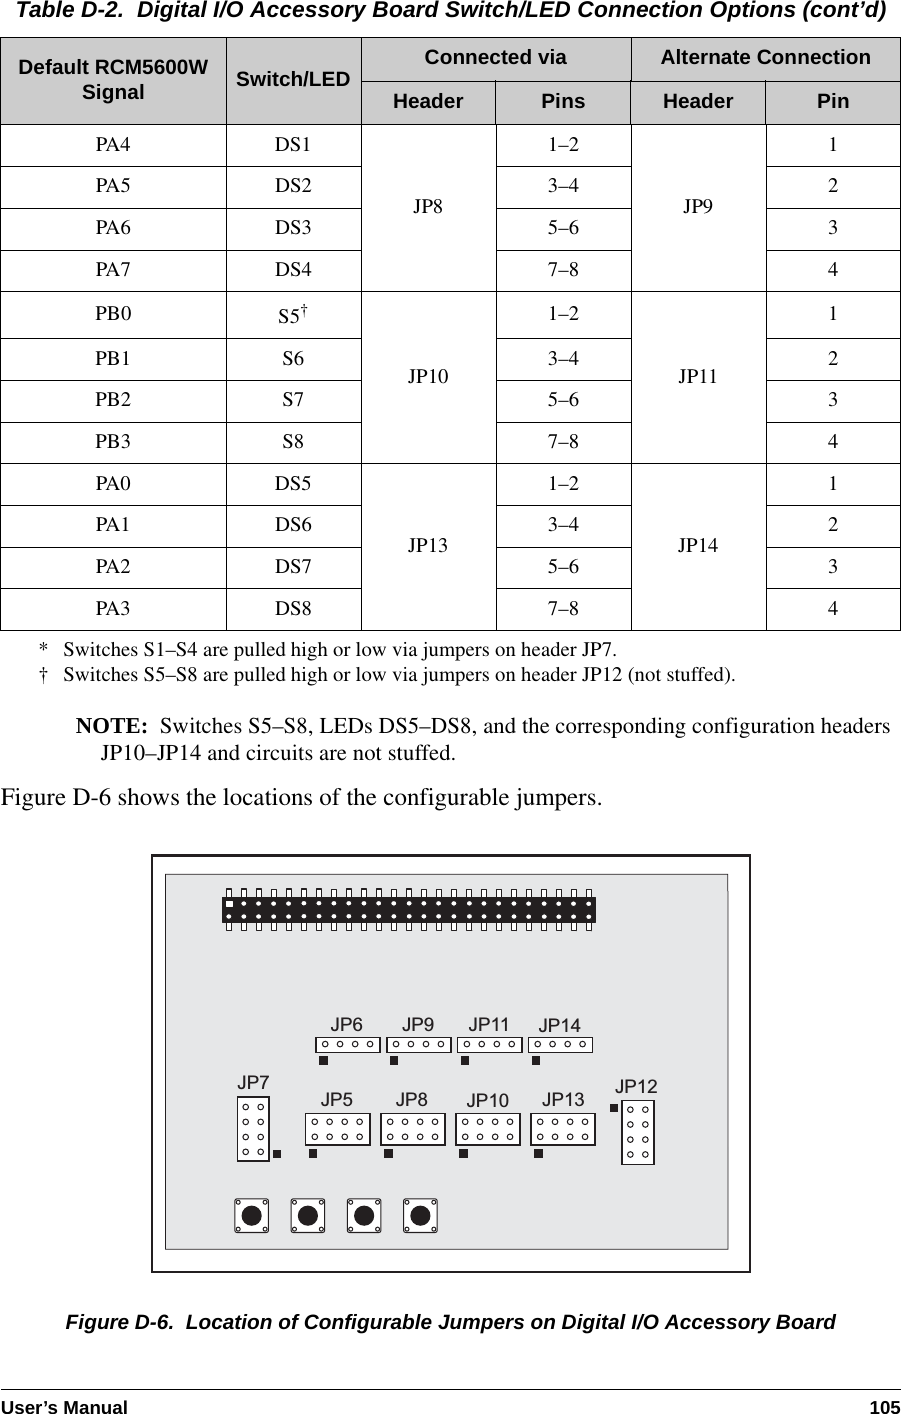 User’s Manual 105NOTE: Switches S5–S8, LEDs DS5–DS8, and the corresponding configuration headers JP10–JP14 and circuits are not stuffed.Figure D-6 shows the locations of the configurable jumpers.Figure D-6.  Location of Configurable Jumpers on Digital I/O Accessory BoardPA4 DS1JP81–2JP91PA5 DS2 3–4 2PA6 DS3 5–6 3PA7 DS4 7–8 4PB0 S5†JP101–2JP111PB1 S6 3–4 2PB2 S7 5–6 3PB3 S8 7–8 4PA0 DS5JP131–2JP141PA1 DS6 3–4 2PA2 DS7 5–6 3PA3 DS8 7–8 4* Switches S1–S4 are pulled high or low via jumpers on header JP7.† Switches S5–S8 are pulled high or low via jumpers on header JP12 (not stuffed).Table D-2.  Digital I/O Accessory Board Switch/LED Connection Options (cont’d)Default RCM5600W Signal Switch/LED Connected via Alternate ConnectionHeader Pins Header PinJP7 JP5 JP8 JP10 JP13 JP12JP6 JP9 JP11 JP14